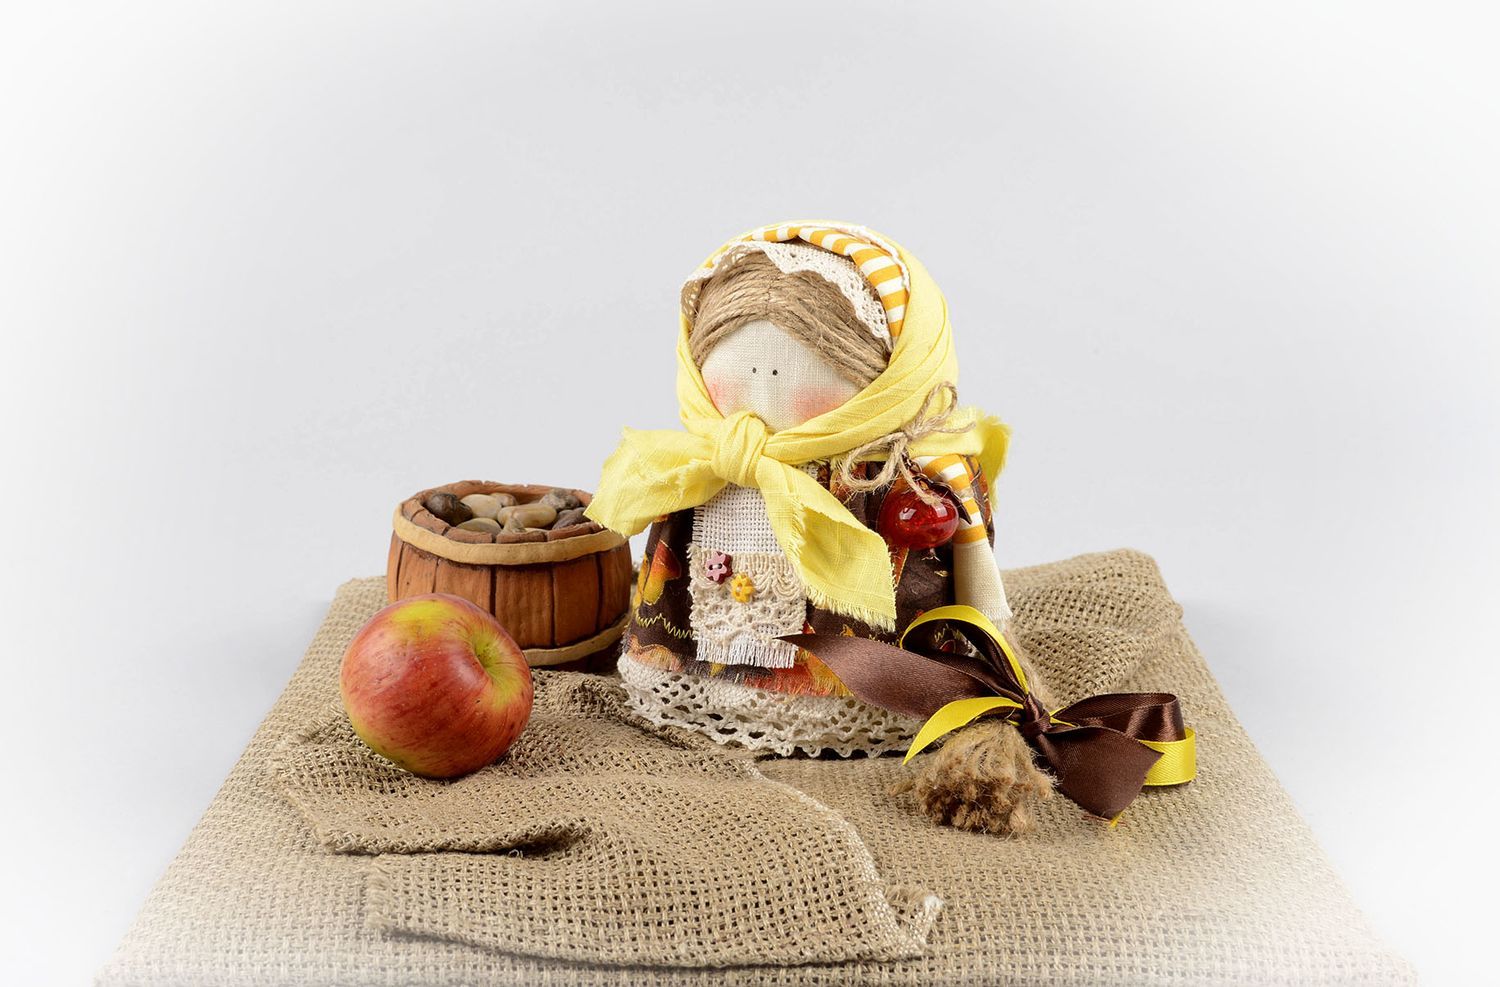 Handmade doll designer doll inrerior decor decorative use only gift for baby photo 5